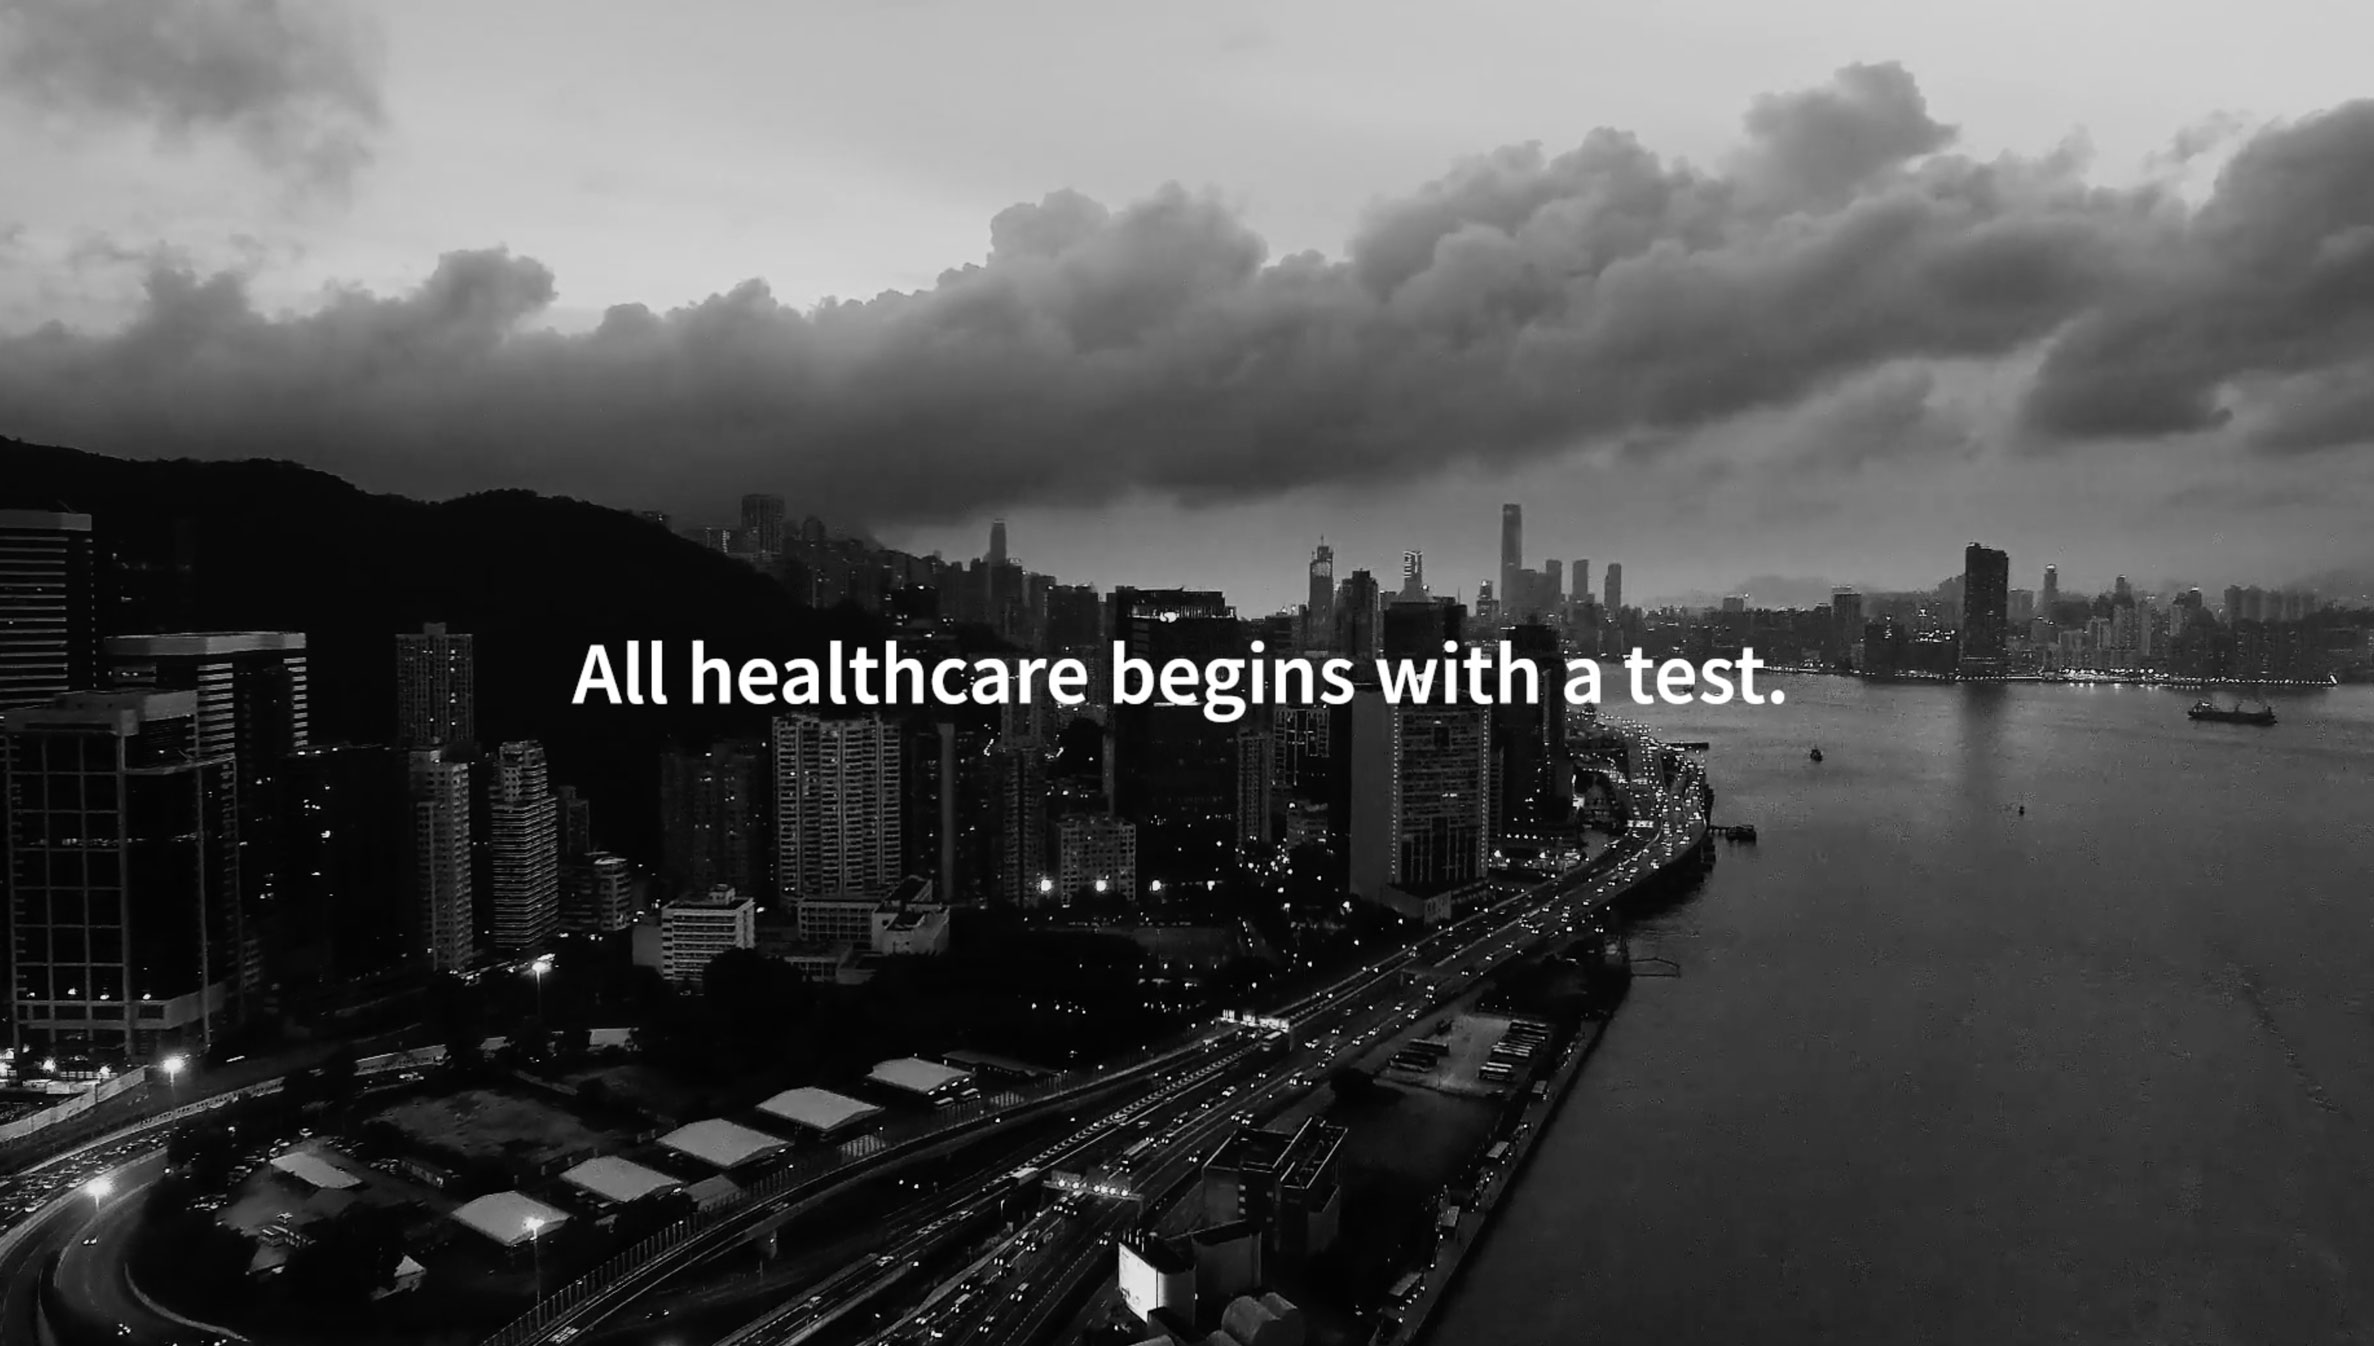 BioIQ solves testing. Let’s get to work.